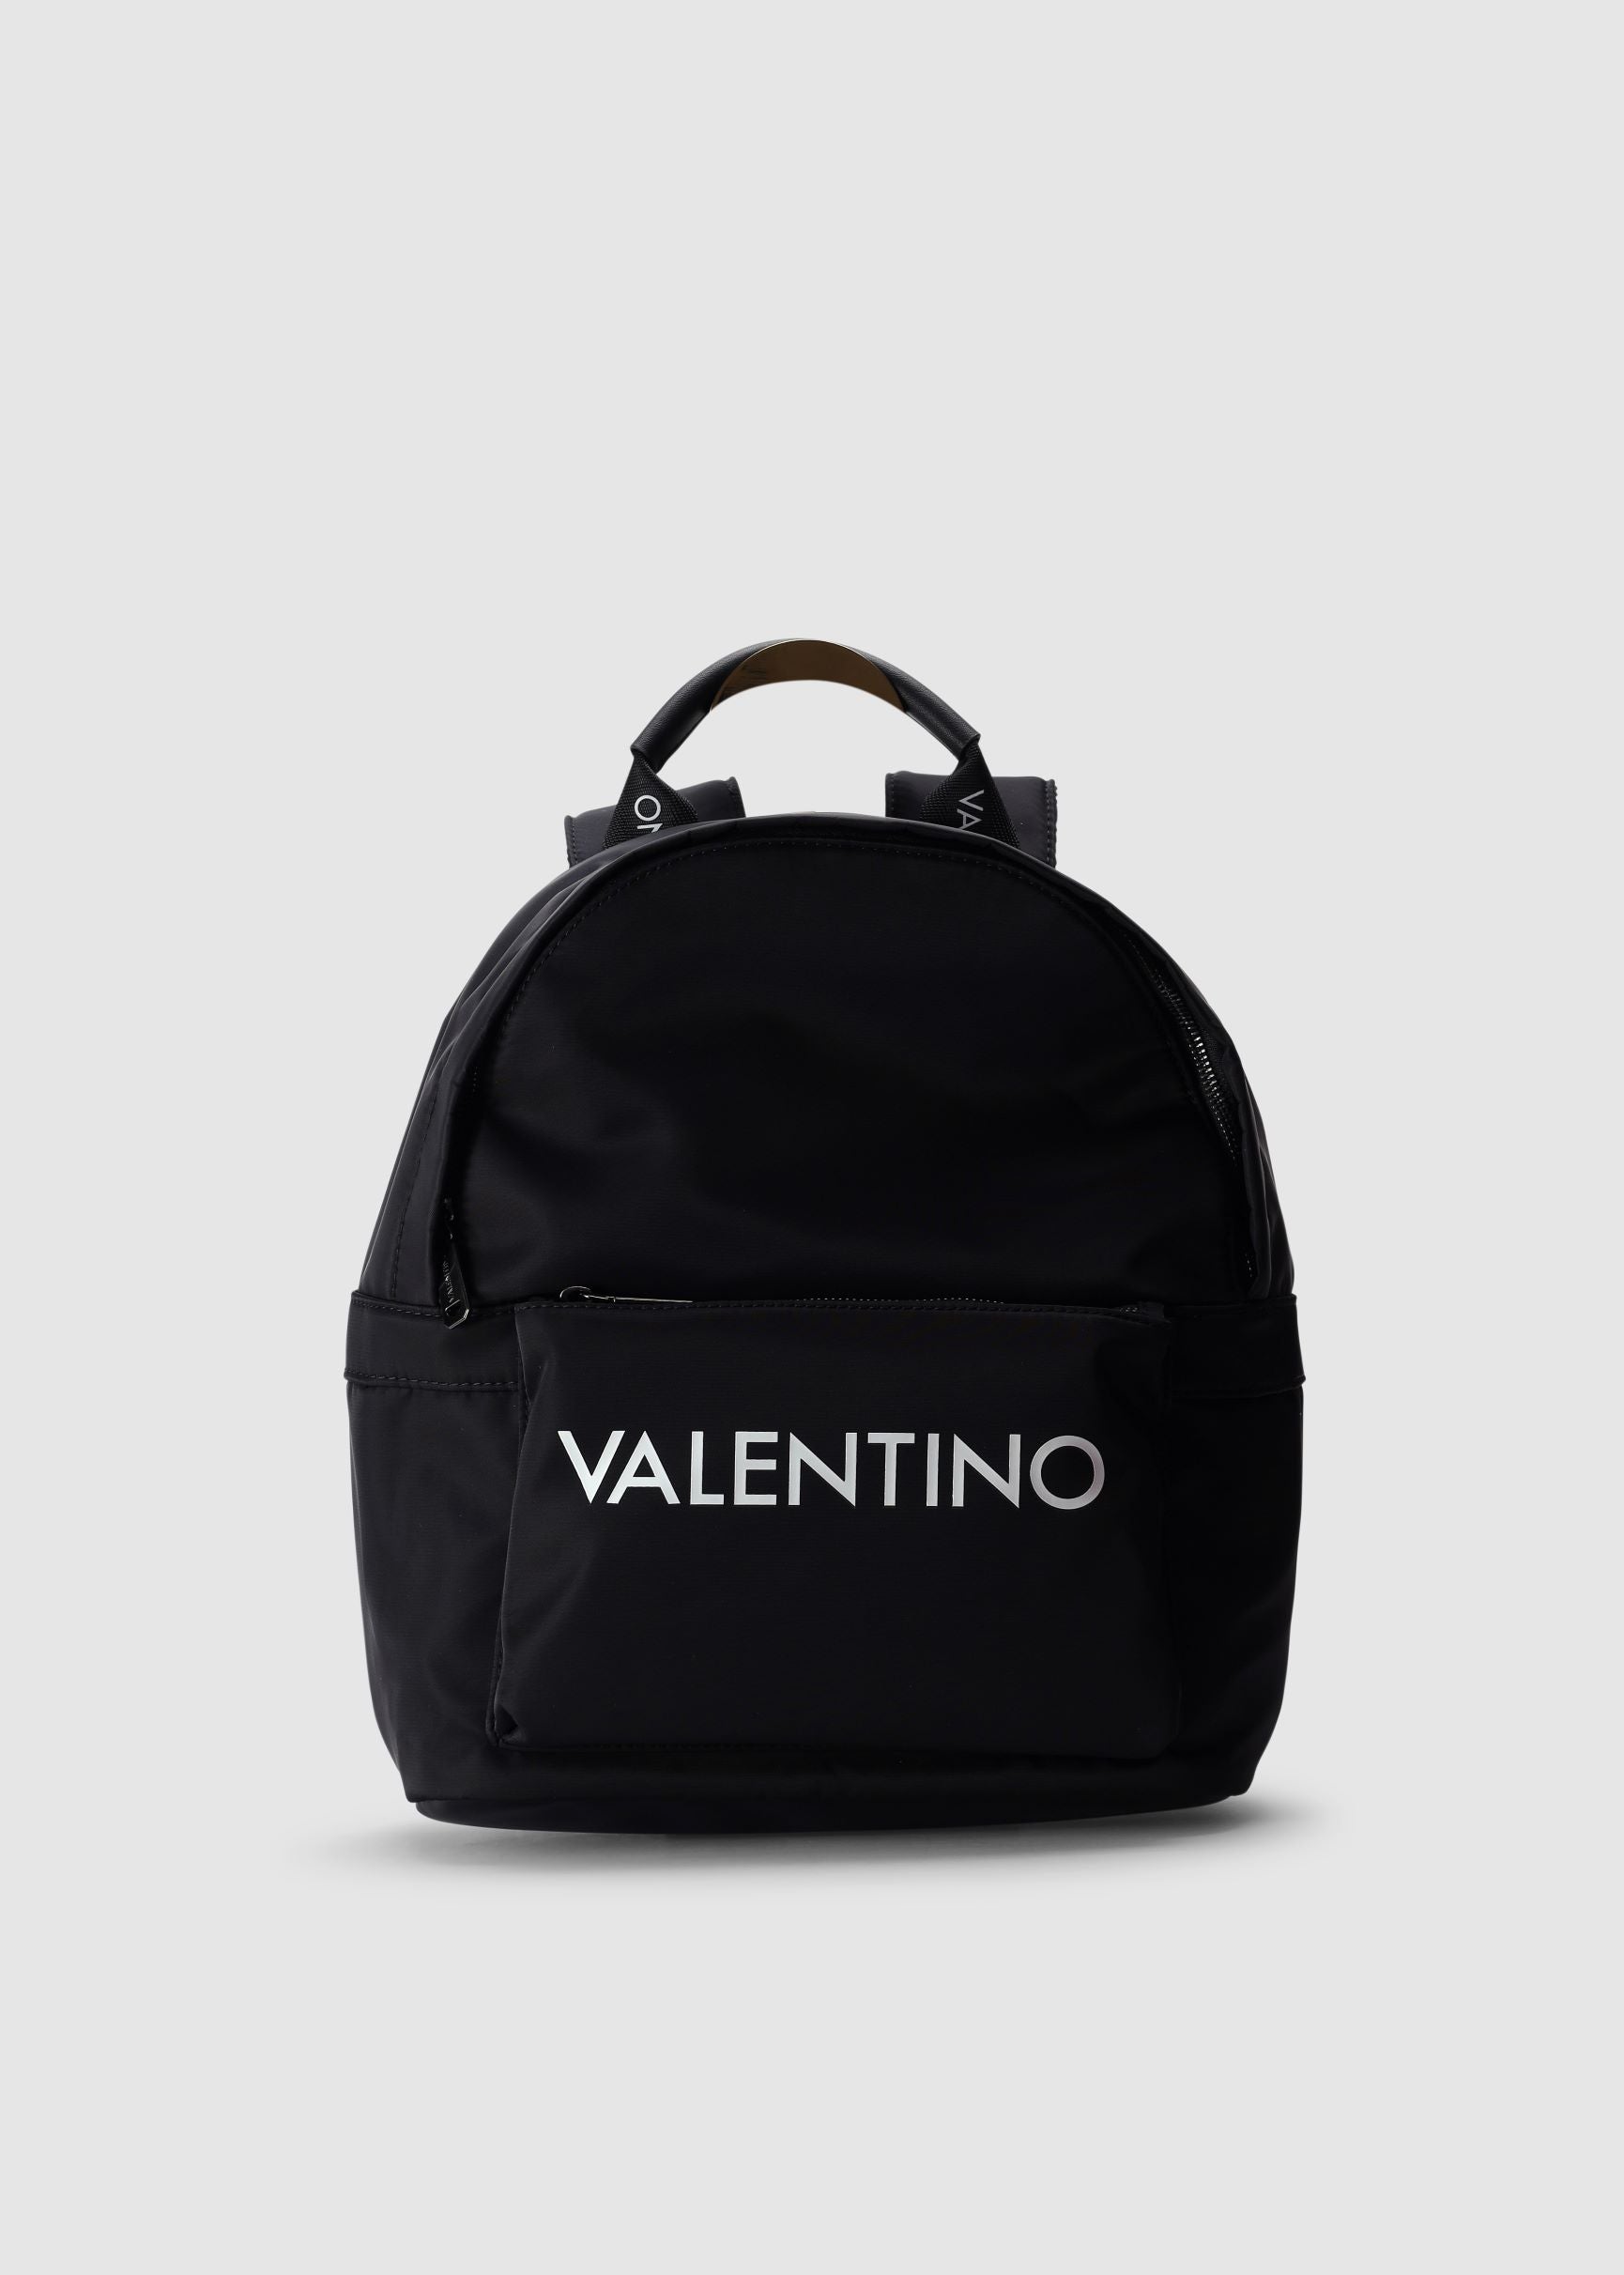 Valentino Bags Mens Kylo Backpack